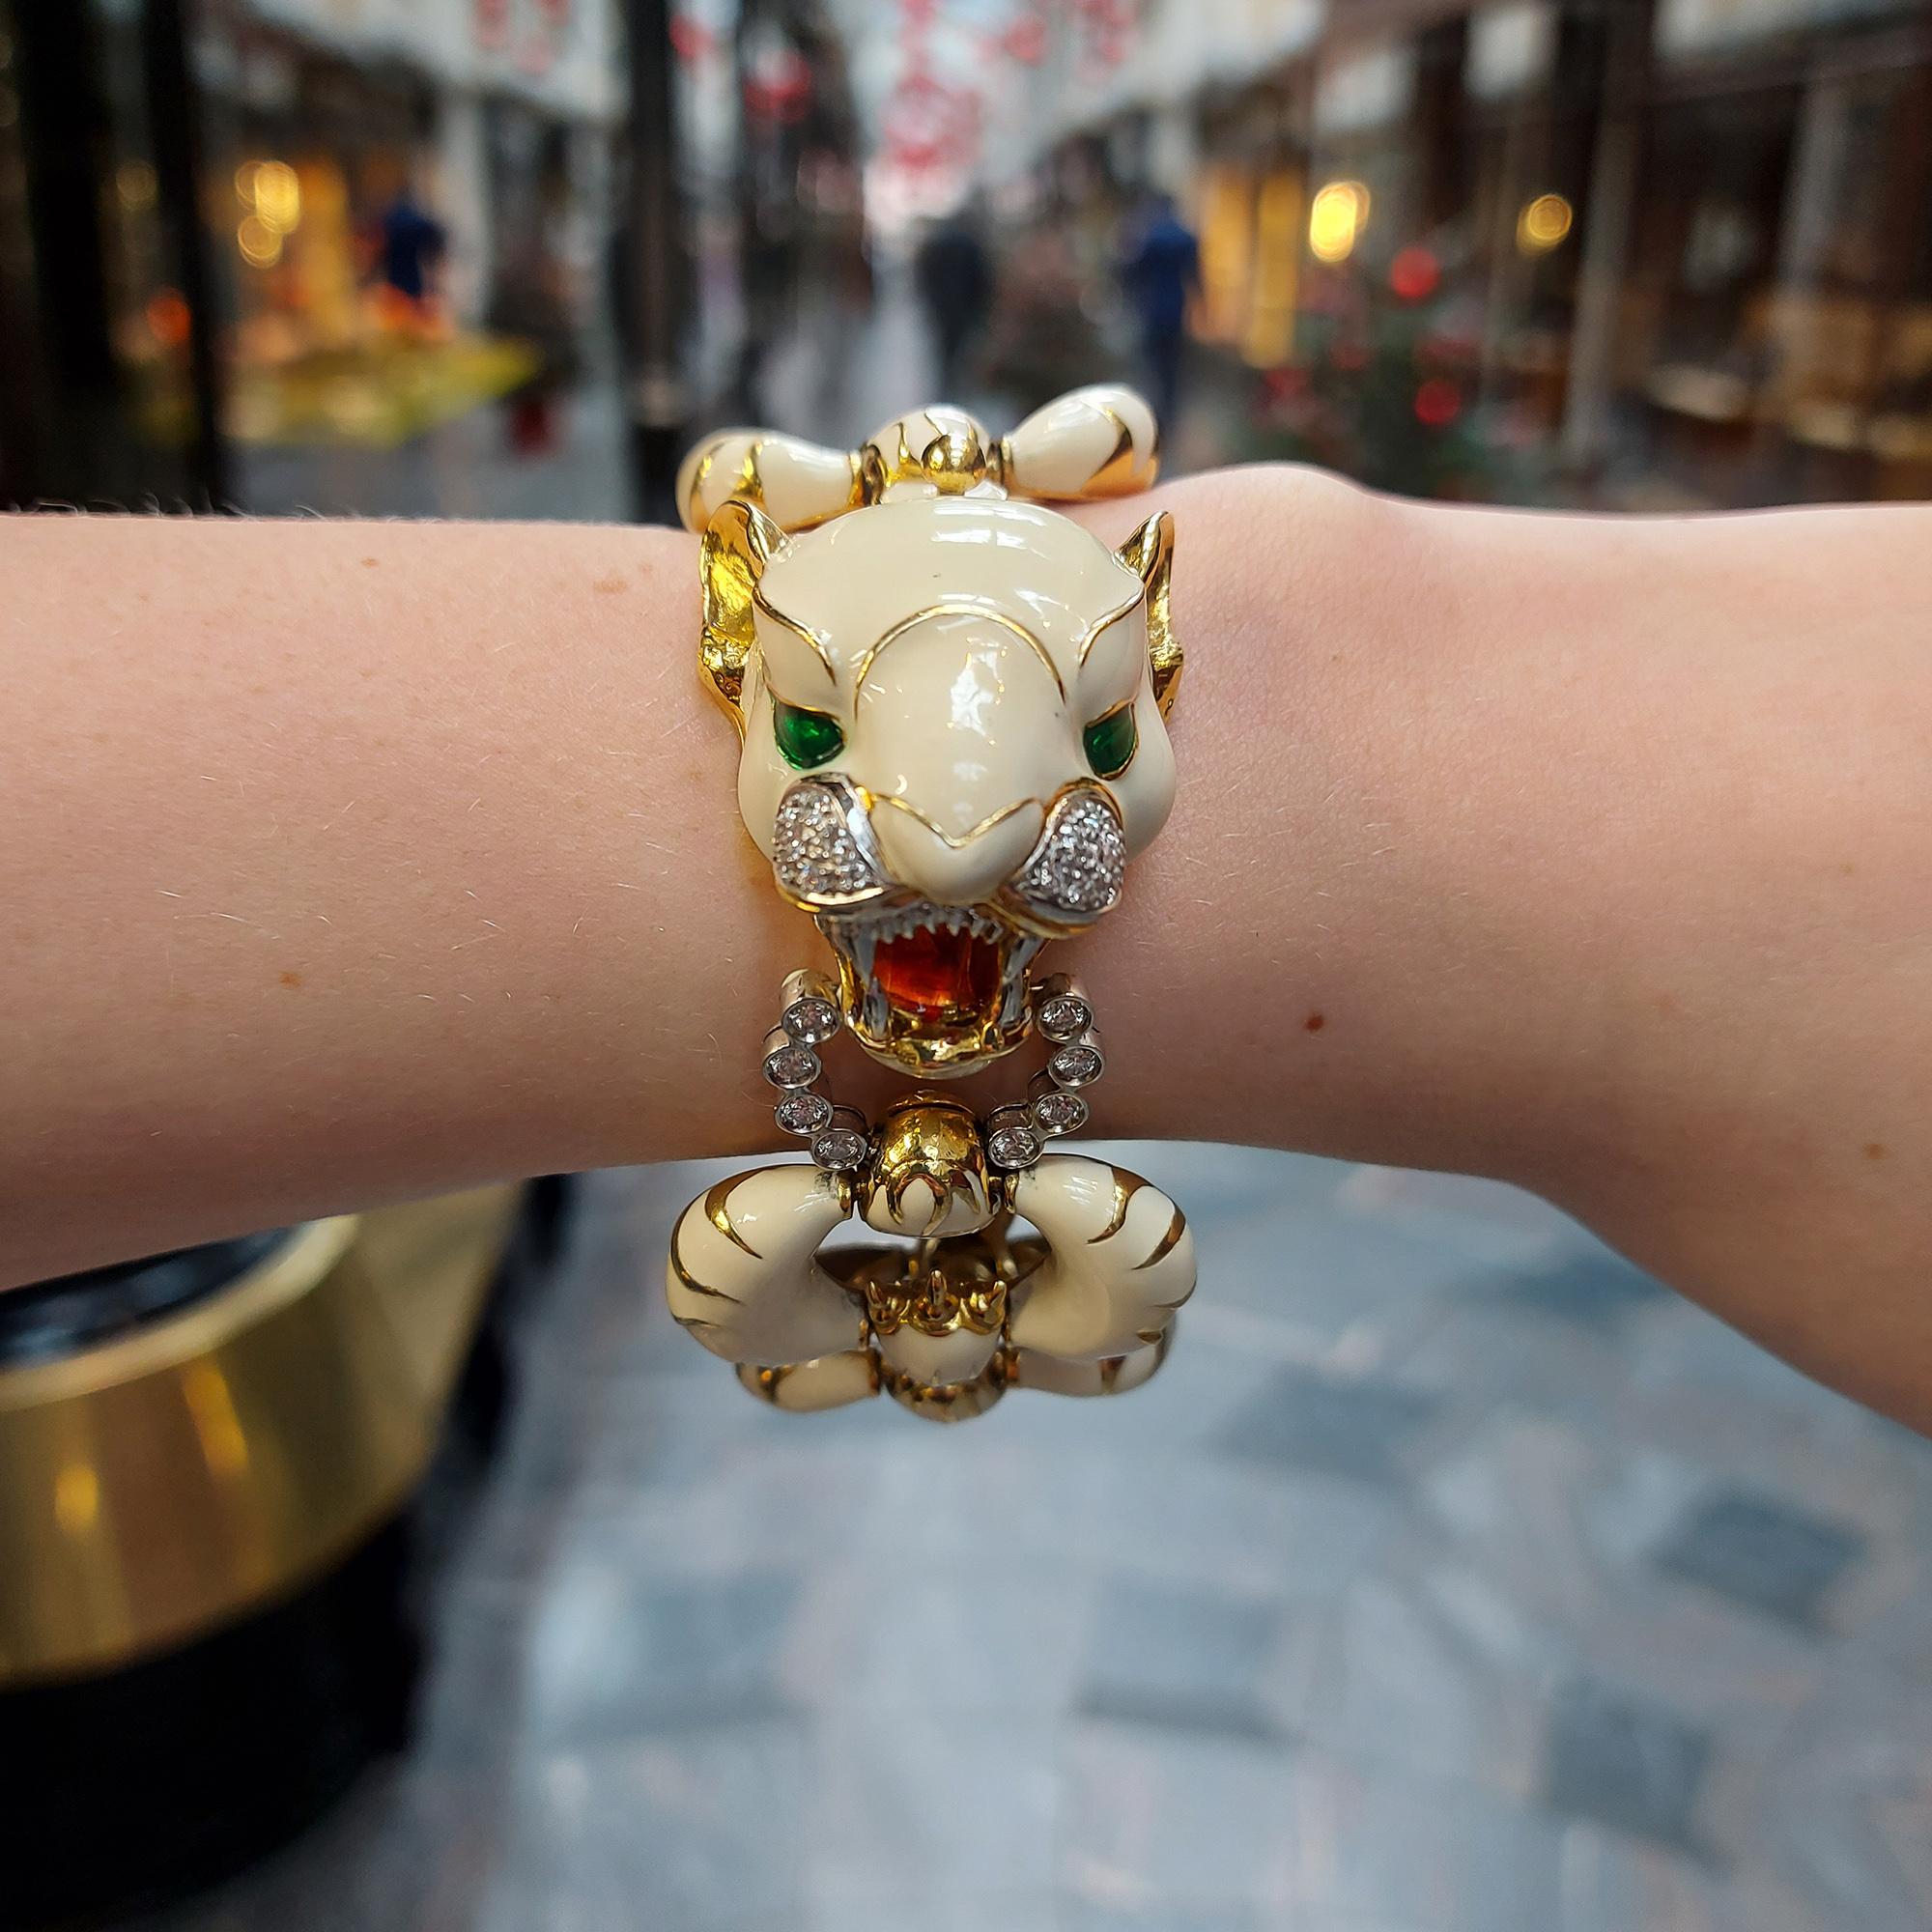 A beautifully unique enamel and diamond Siberian tiger bracelet set in 18k yellow gold.

The piece is modelled on a Siberian tiger and is rendered throughout with slightly off-white enamel. It has been cleverly designed and detailed to show yellow